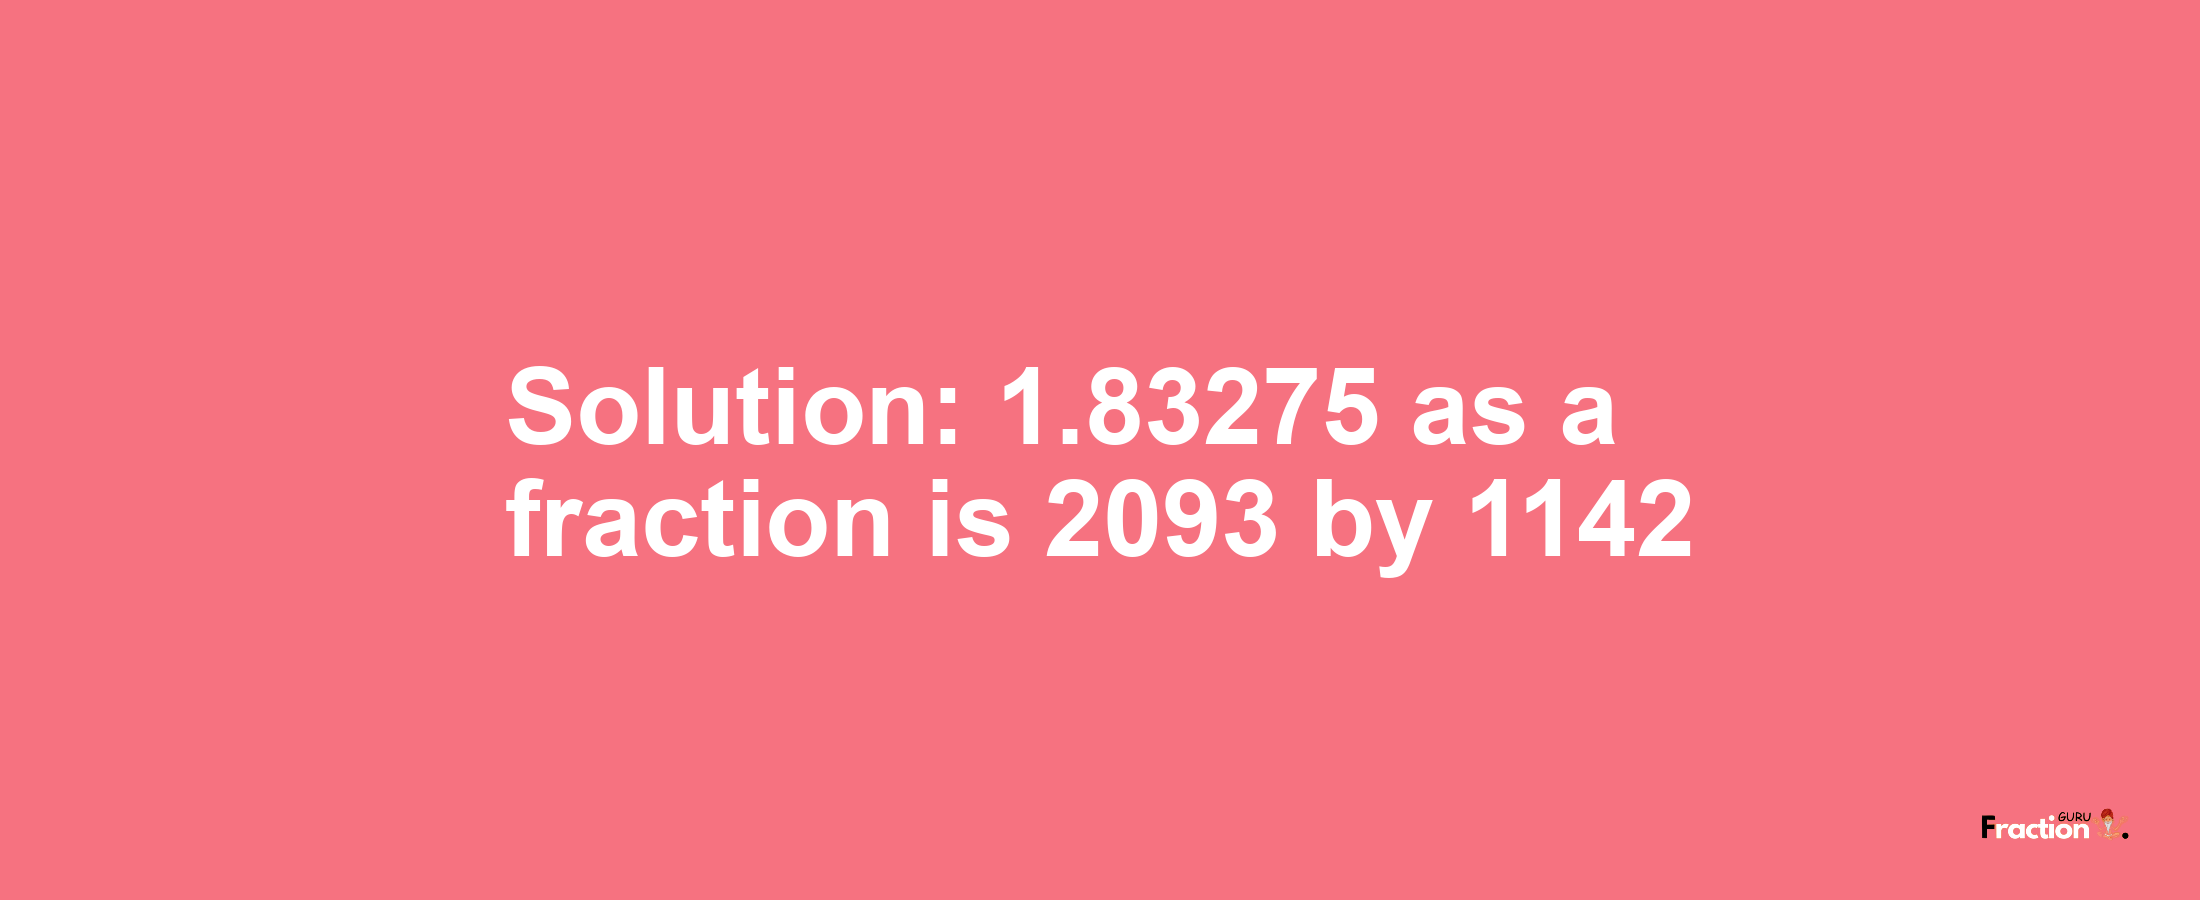 Solution:1.83275 as a fraction is 2093/1142